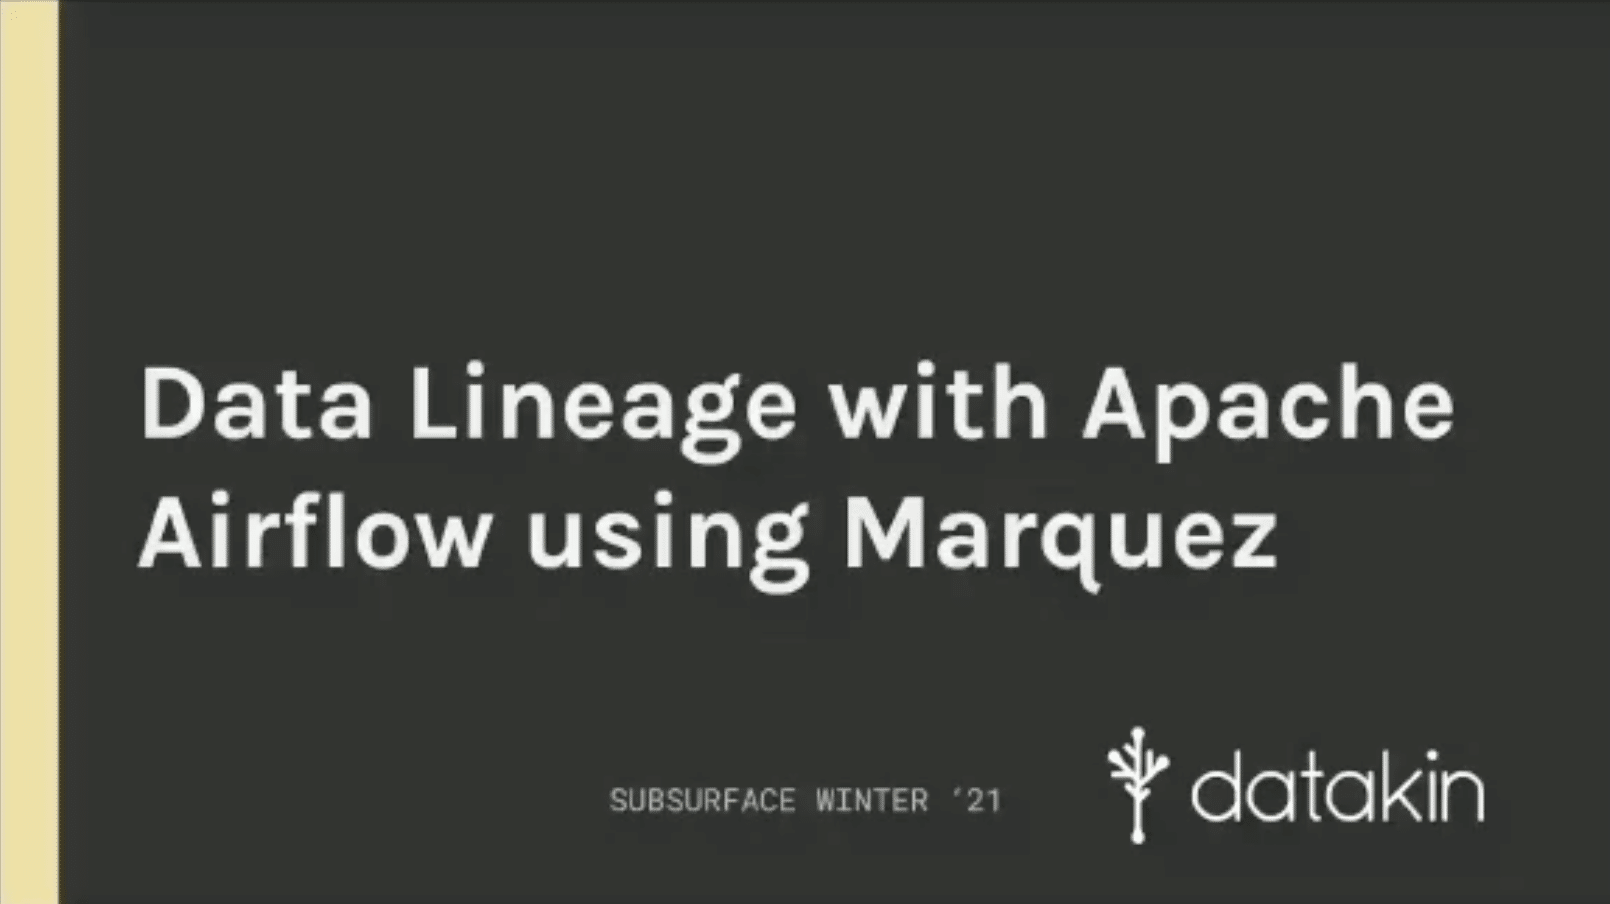 Data Lineage with Apache Airflow